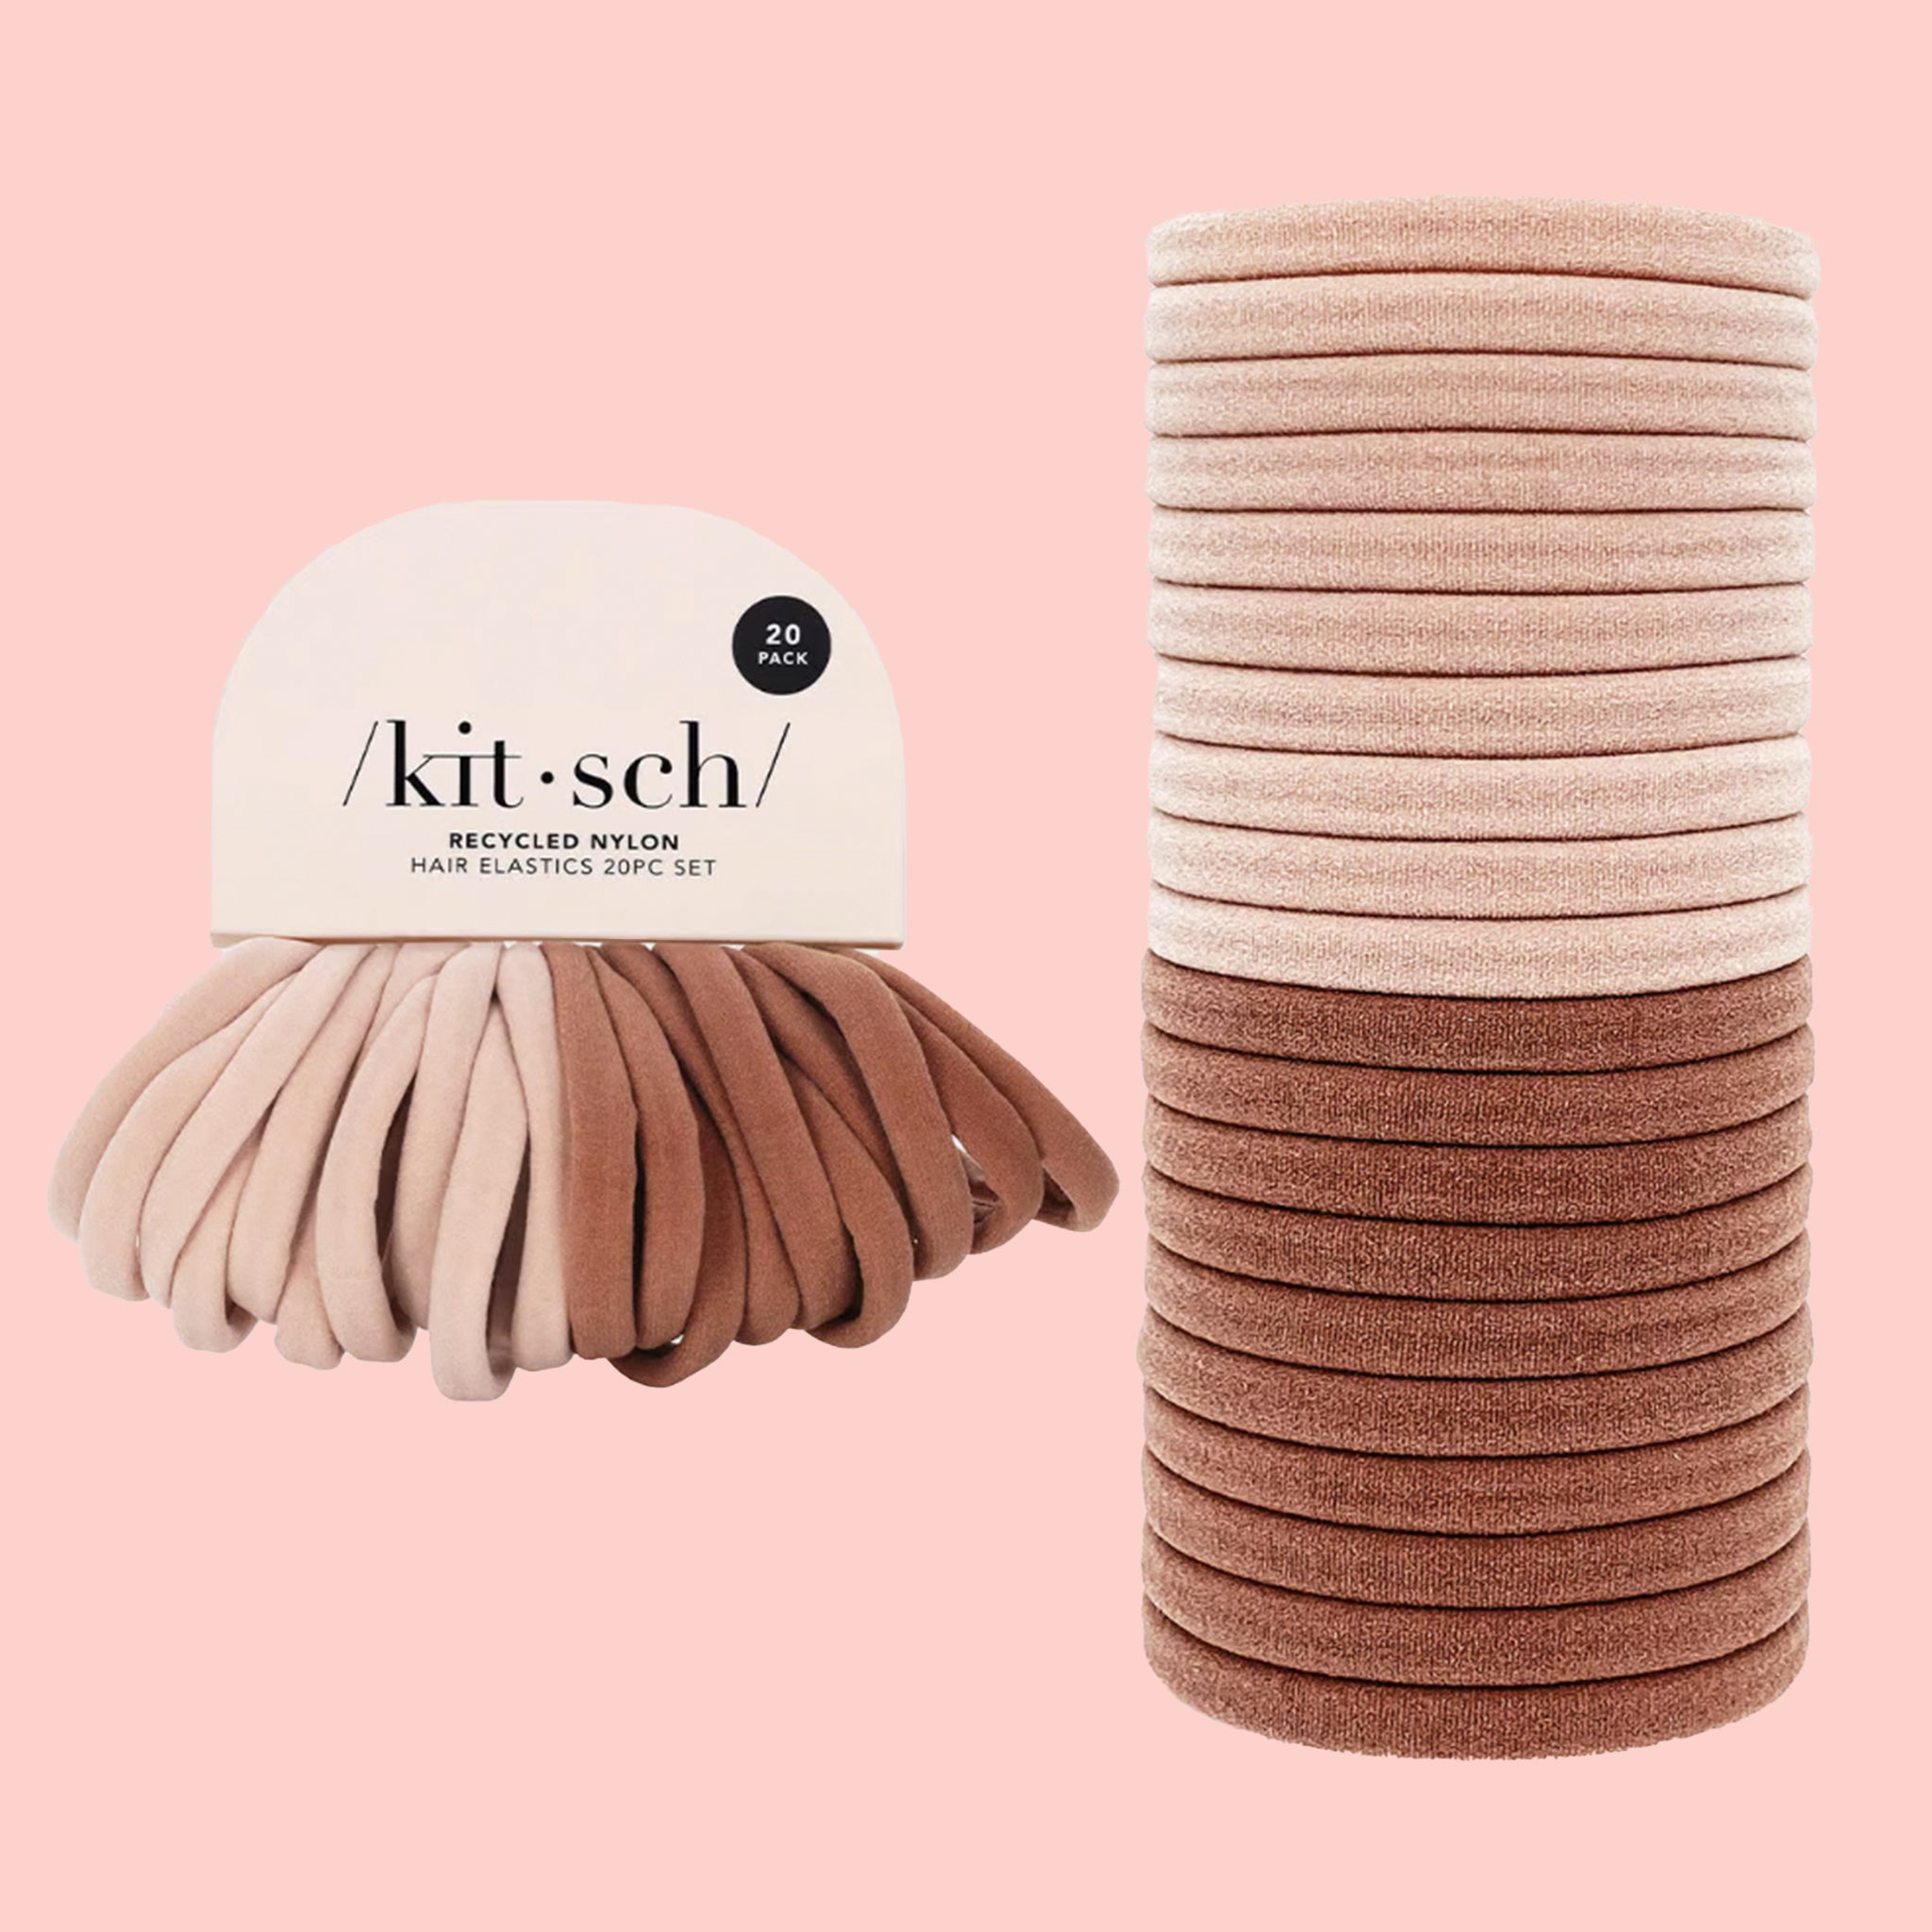 A stack of round recycled nylon elastic hair ties in a light pink shade and a slightly darker blush pink shade.